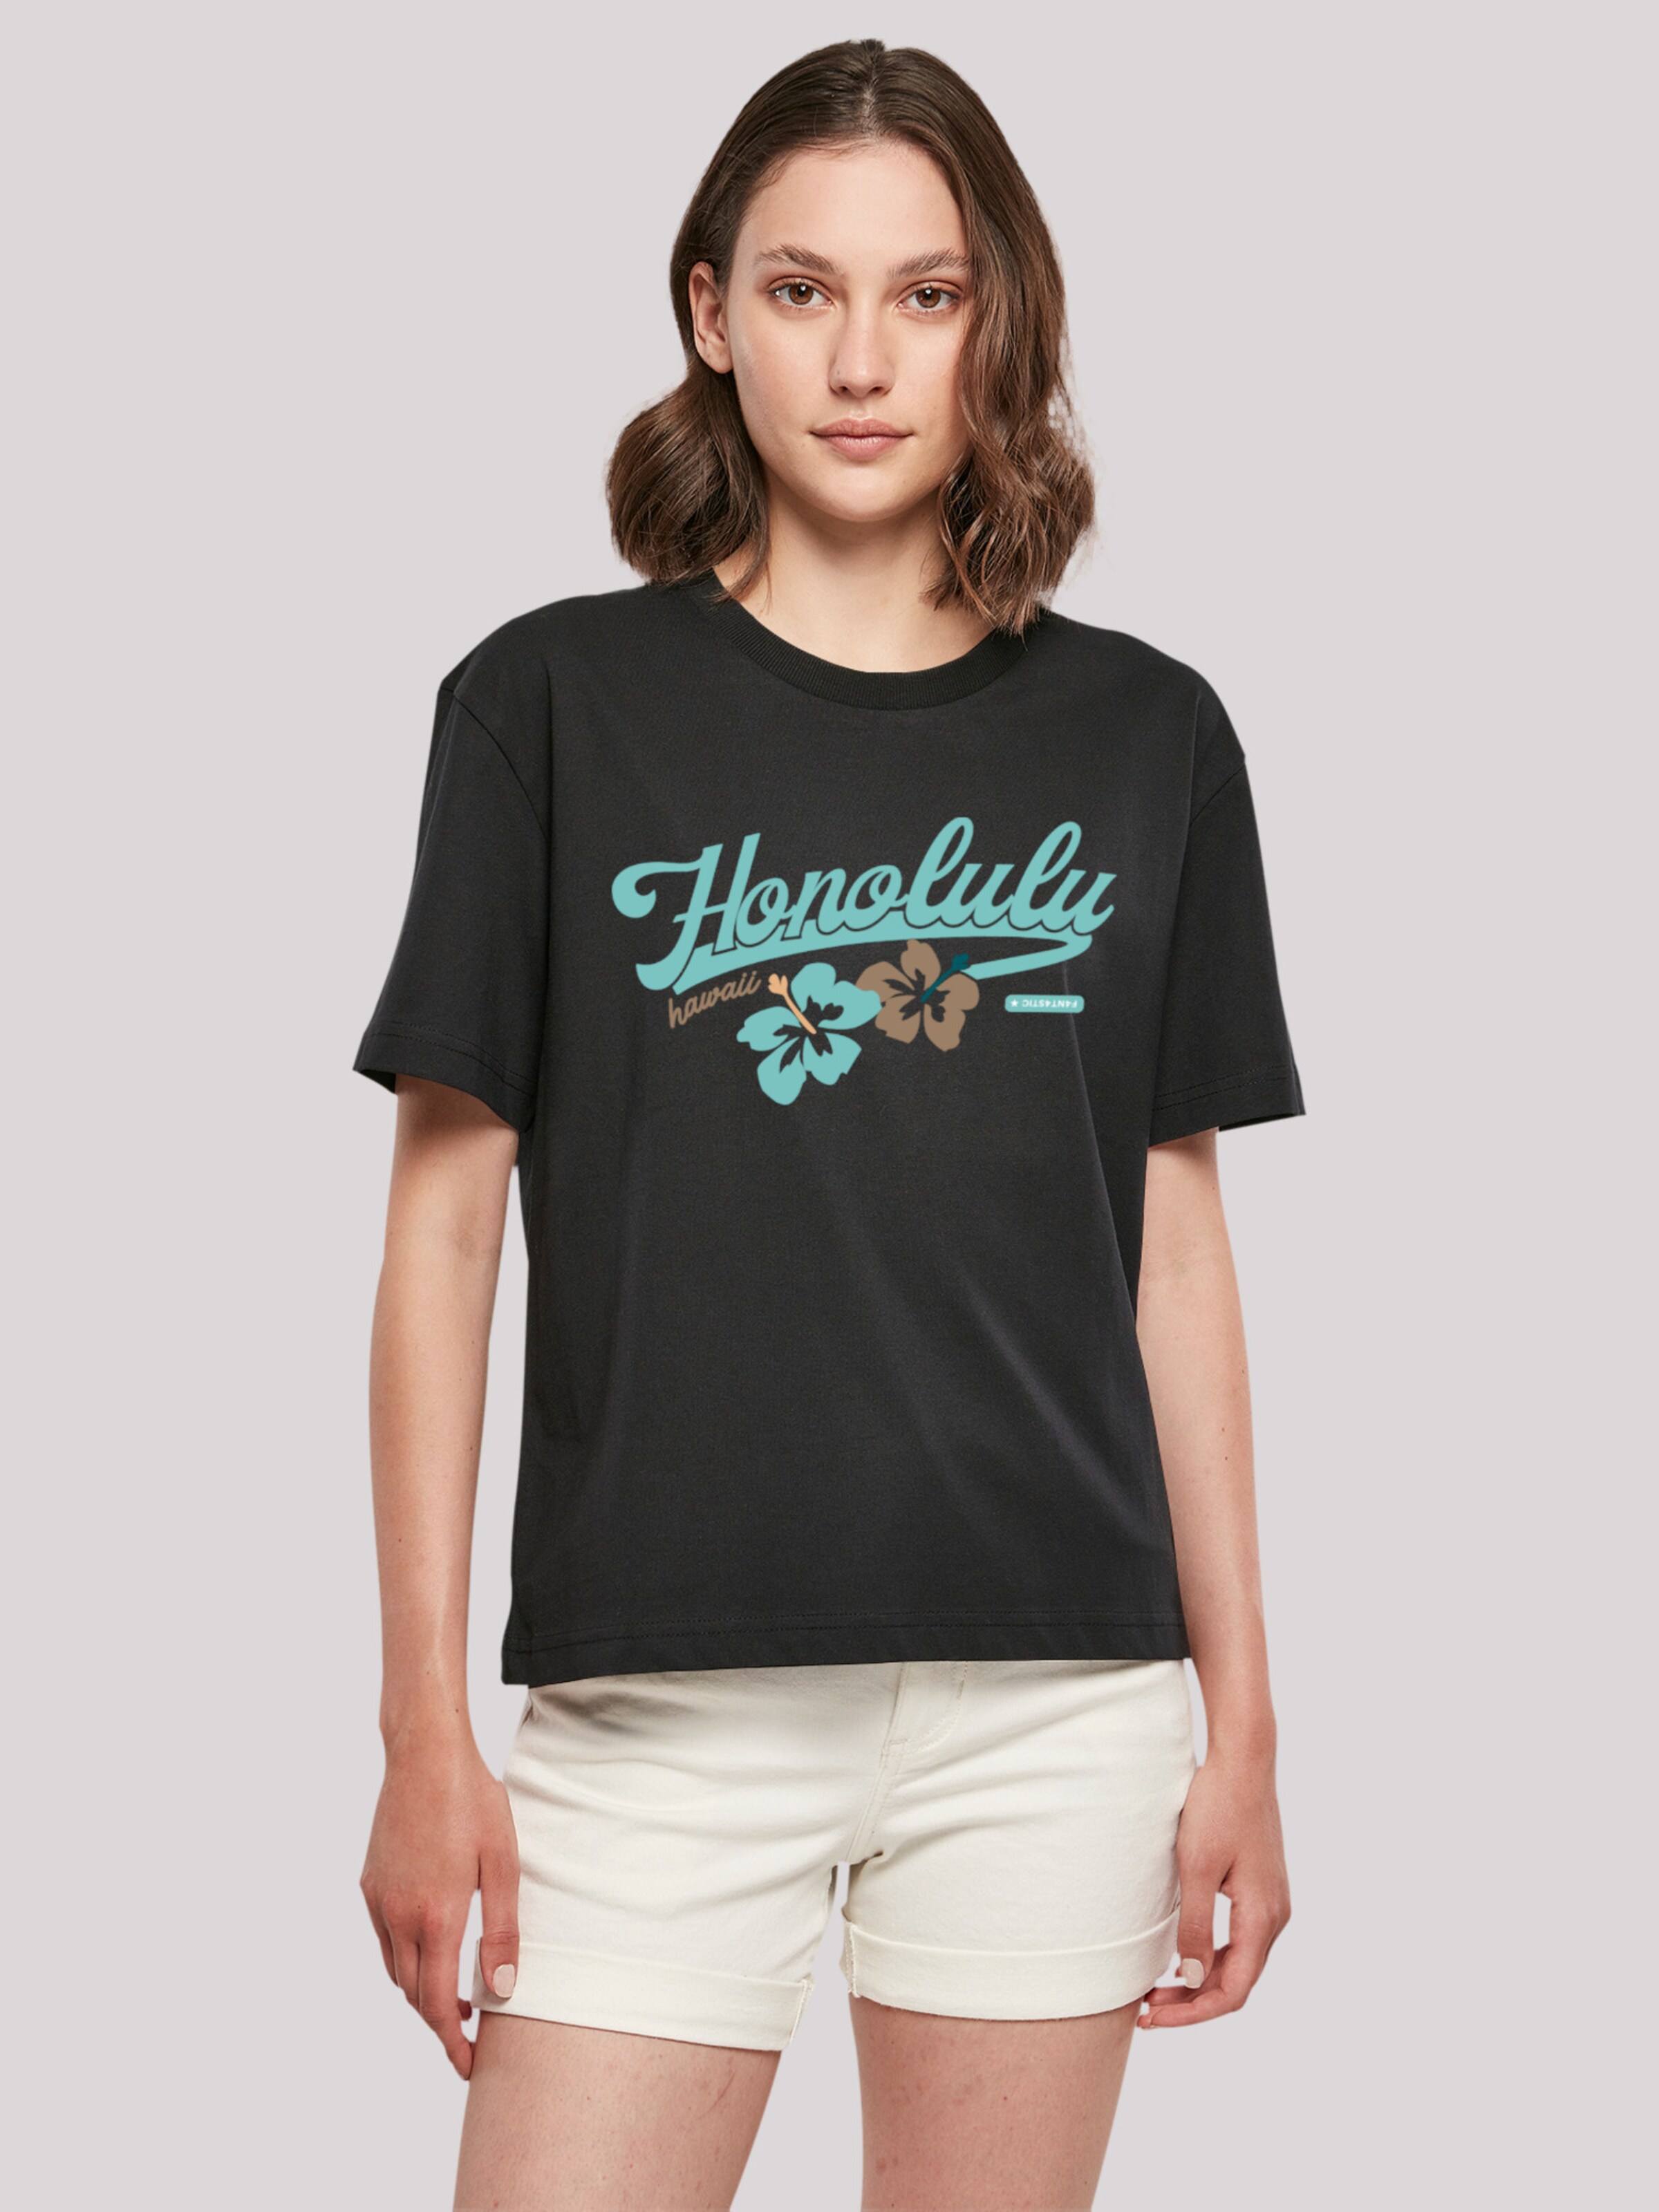 in F4NT4STIC ABOUT | \'Honolulu\' Black Shirt YOU